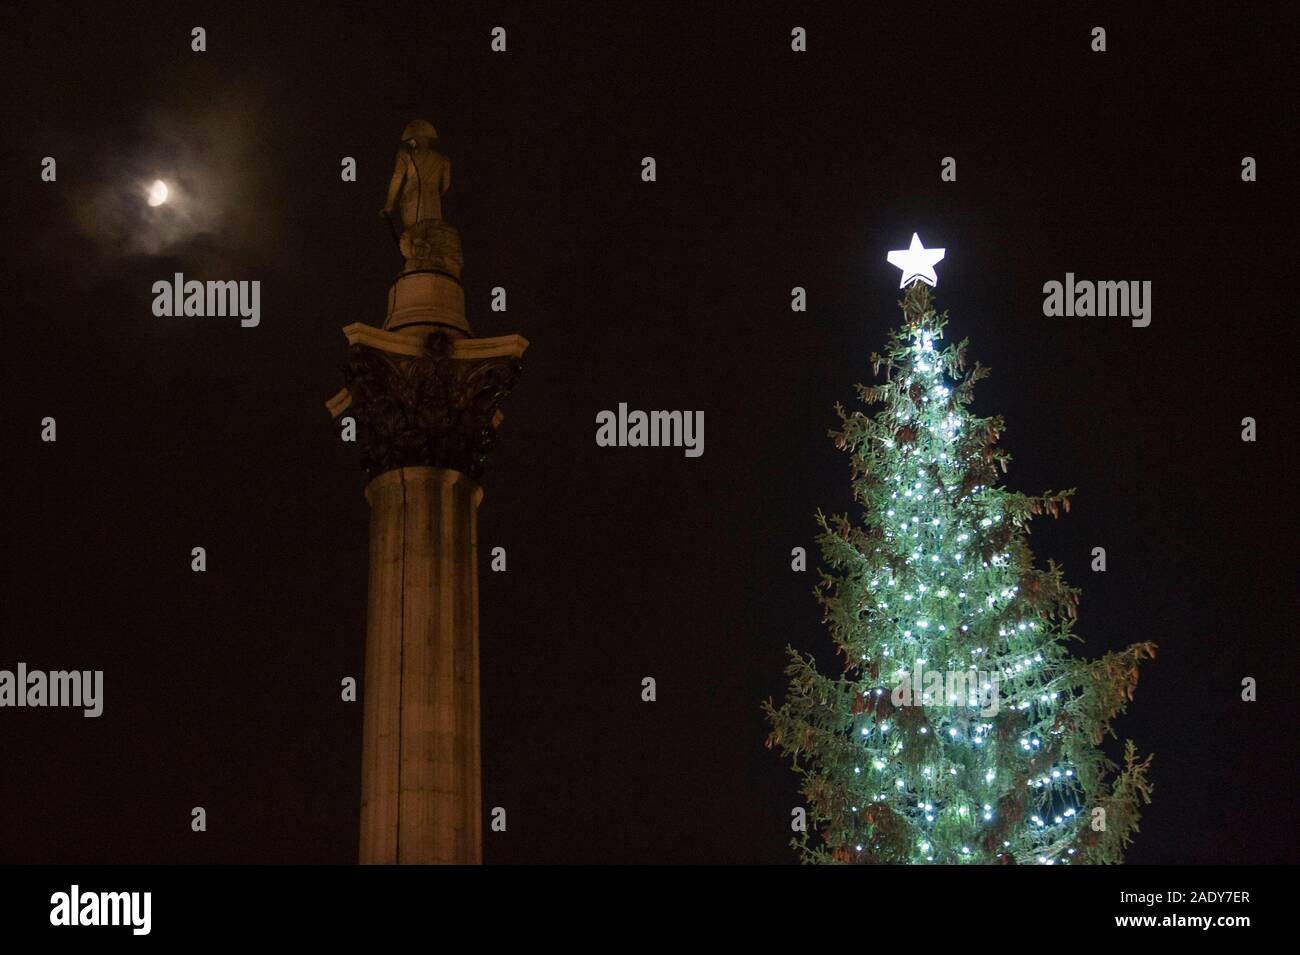 London, UK.  5 December 2019.  The moon, Nelson's Column and the newly lit Christmas Tree in Trafalgar Square.  The tree, a Norwegian spruce, is donated by the City of Oslo to the people of London each year as a token of gratitude for Britain’s support during the Second World War.  This year, the tree has been criticised for having branches which look too sparse. Credit: Stephen Chung / Alamy Live News Stock Photo